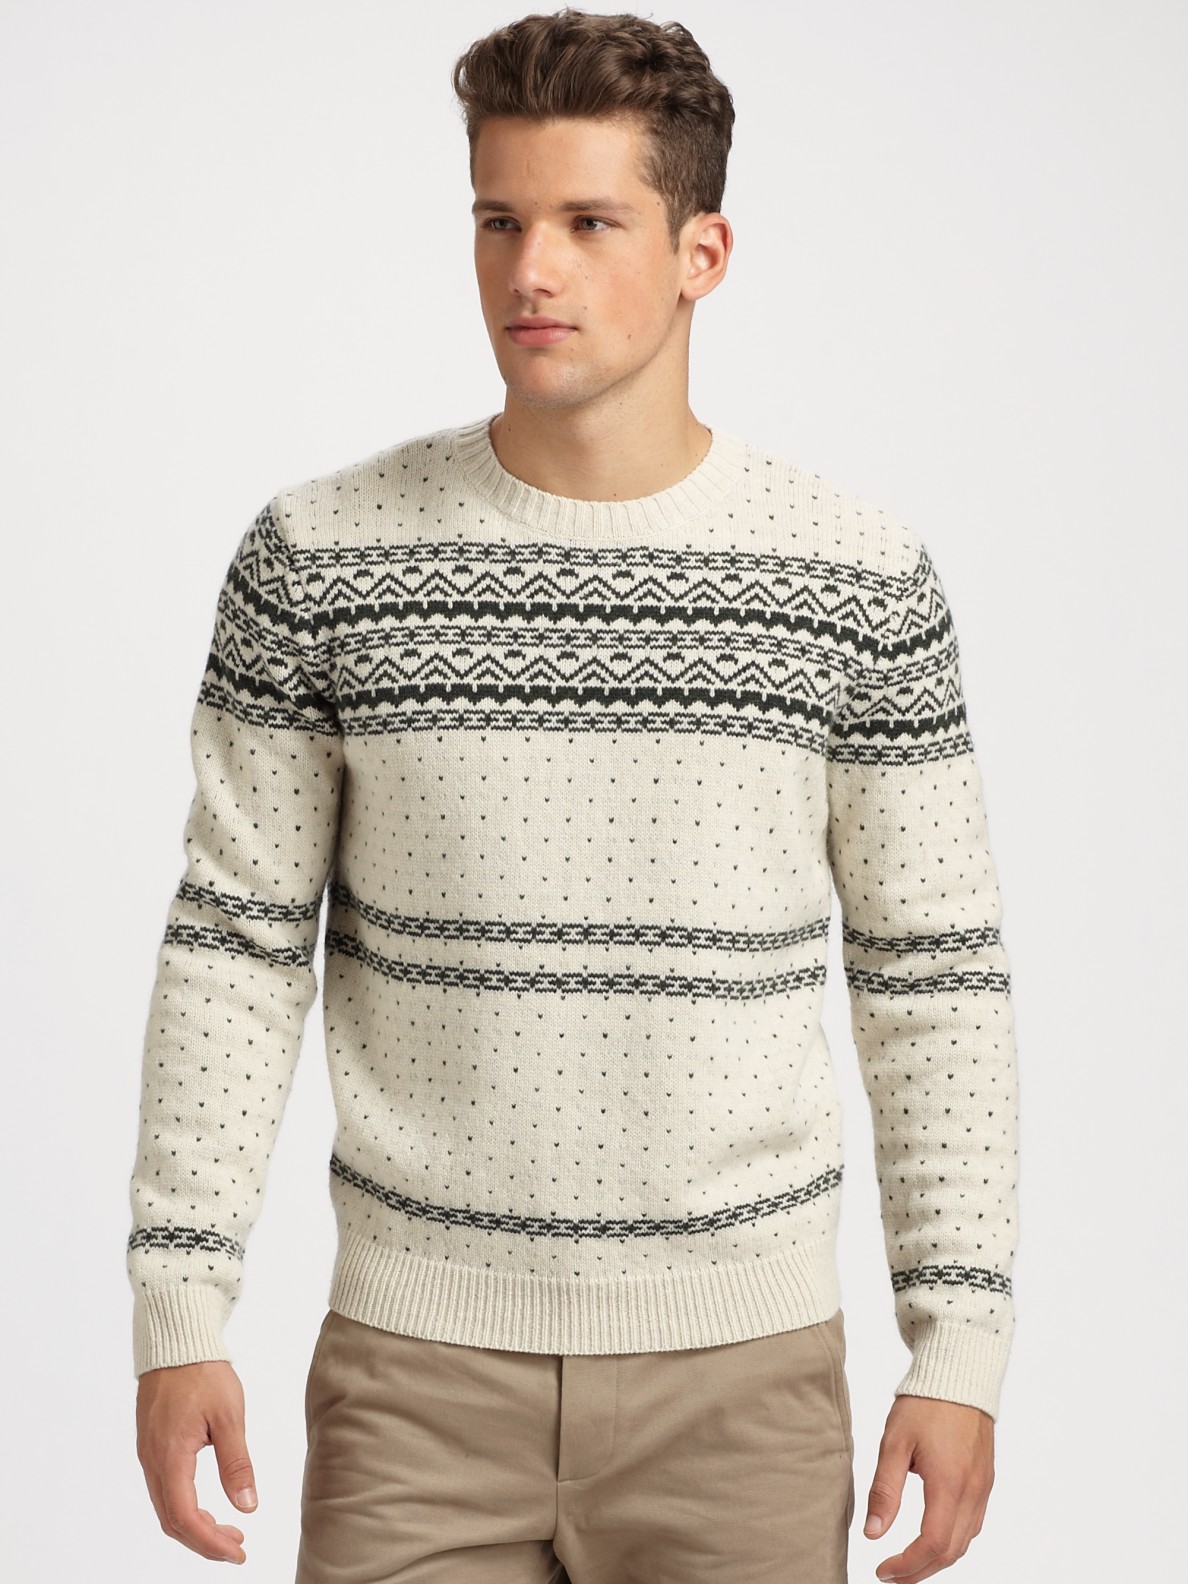 A.P.C. Wool Fair Isle Sweater in White (Natural) for Men - Lyst